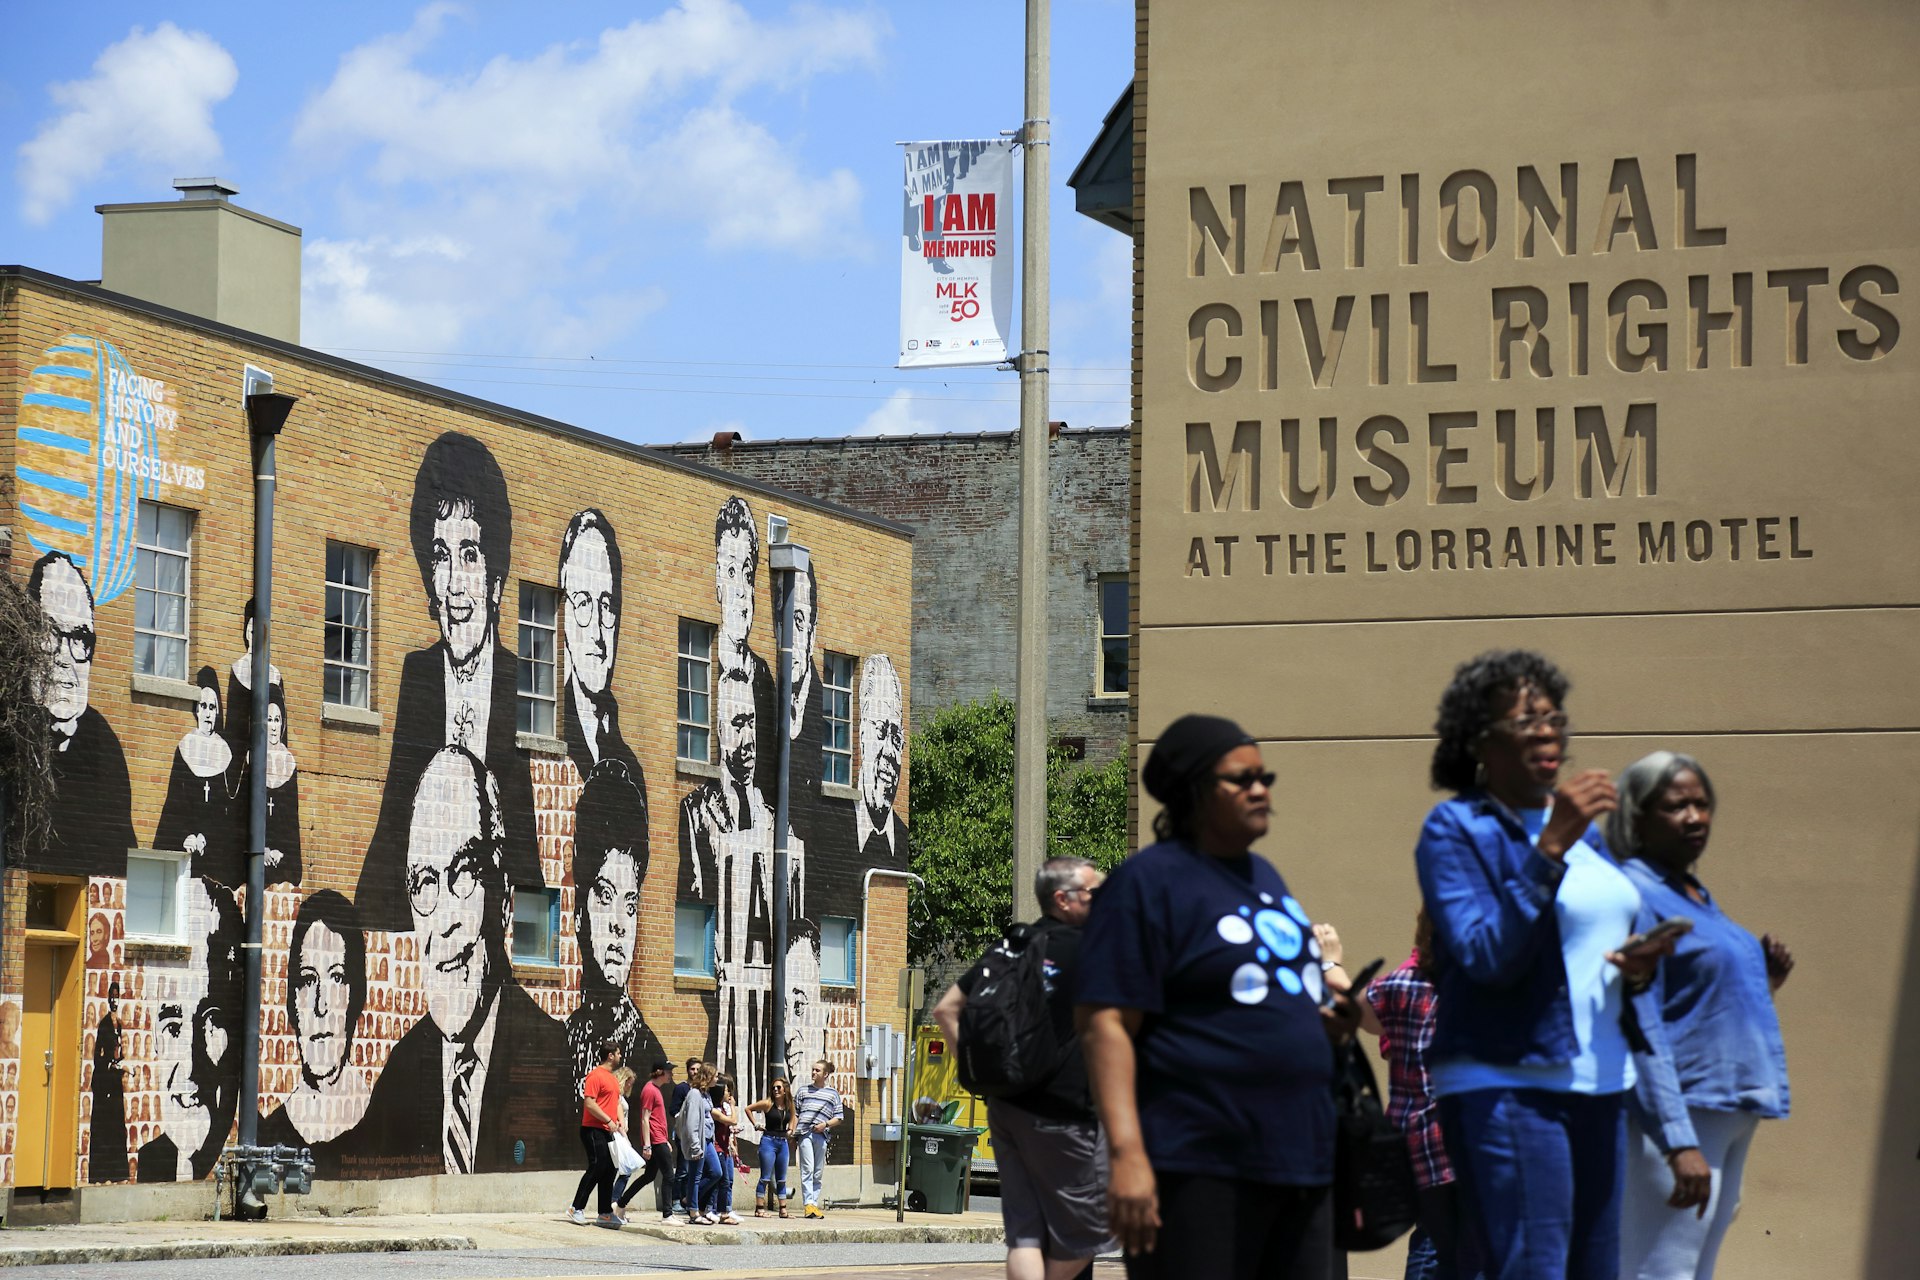 A trio of women walk towards the National Civil Rights Museum at the Lorraine Motel. In the background you can see a brick building covered in paintings of prominent Americans. 